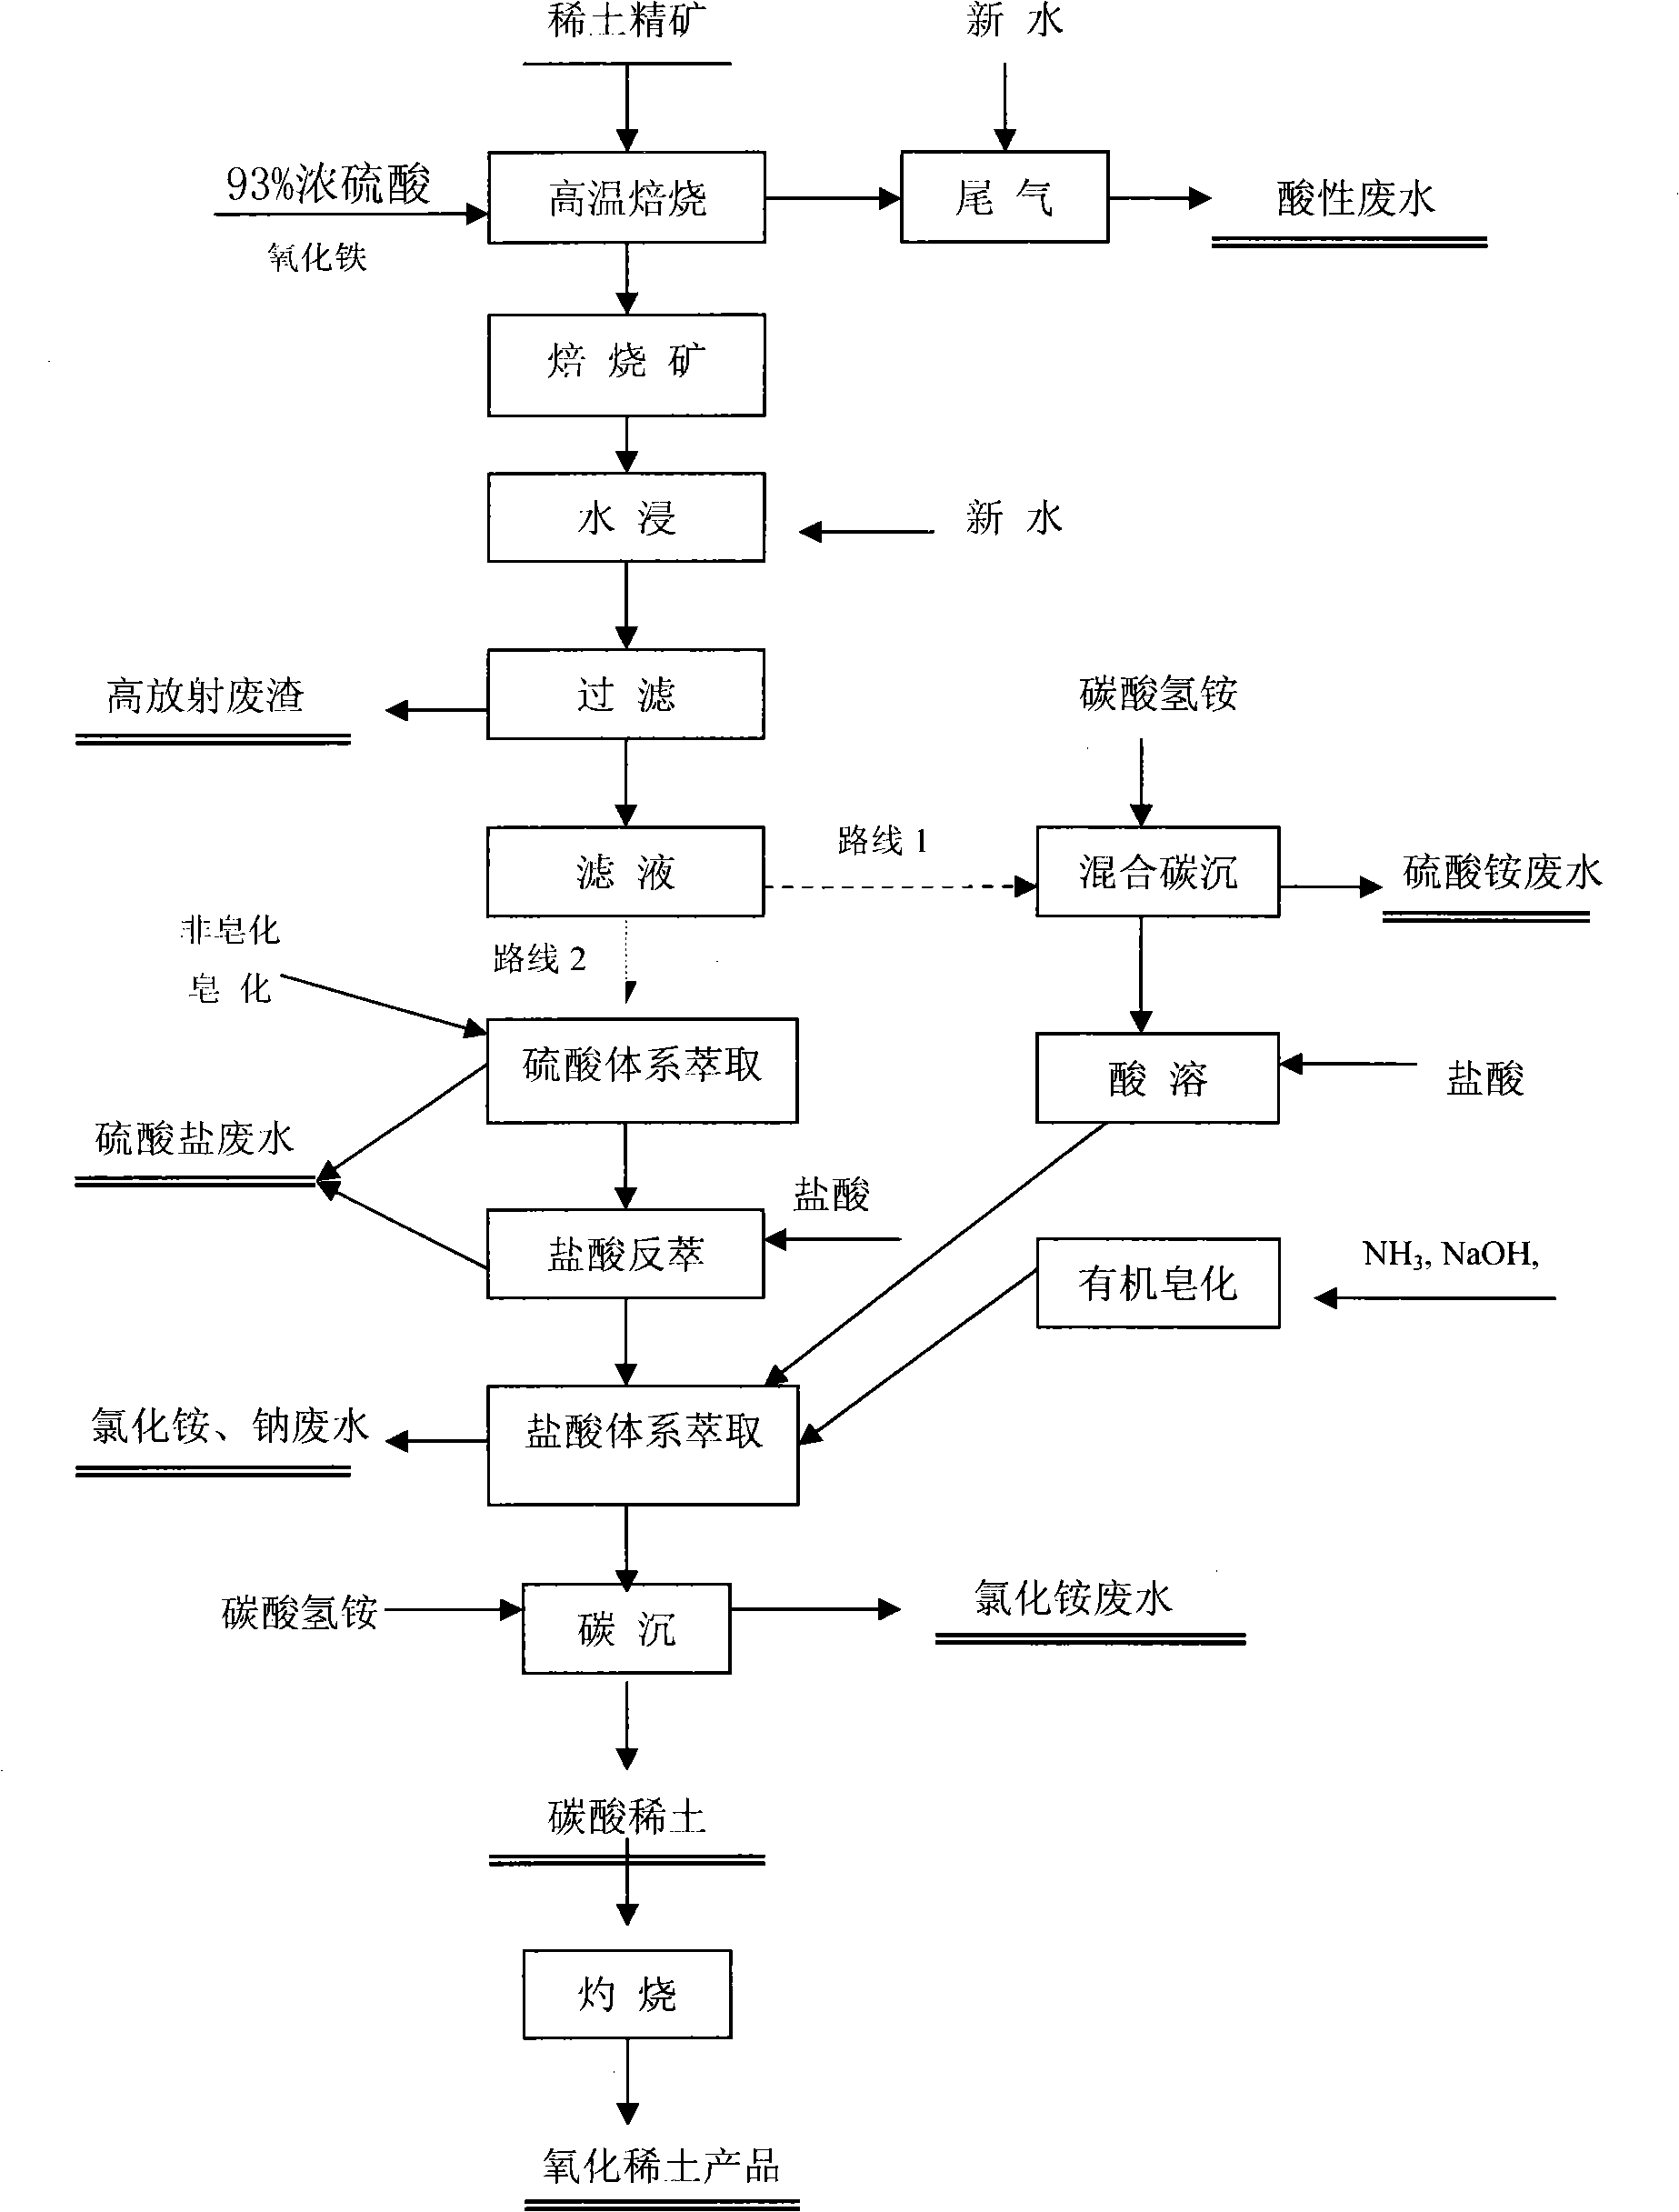 Process for rare-earth smelting resource reclamation and cyclic production